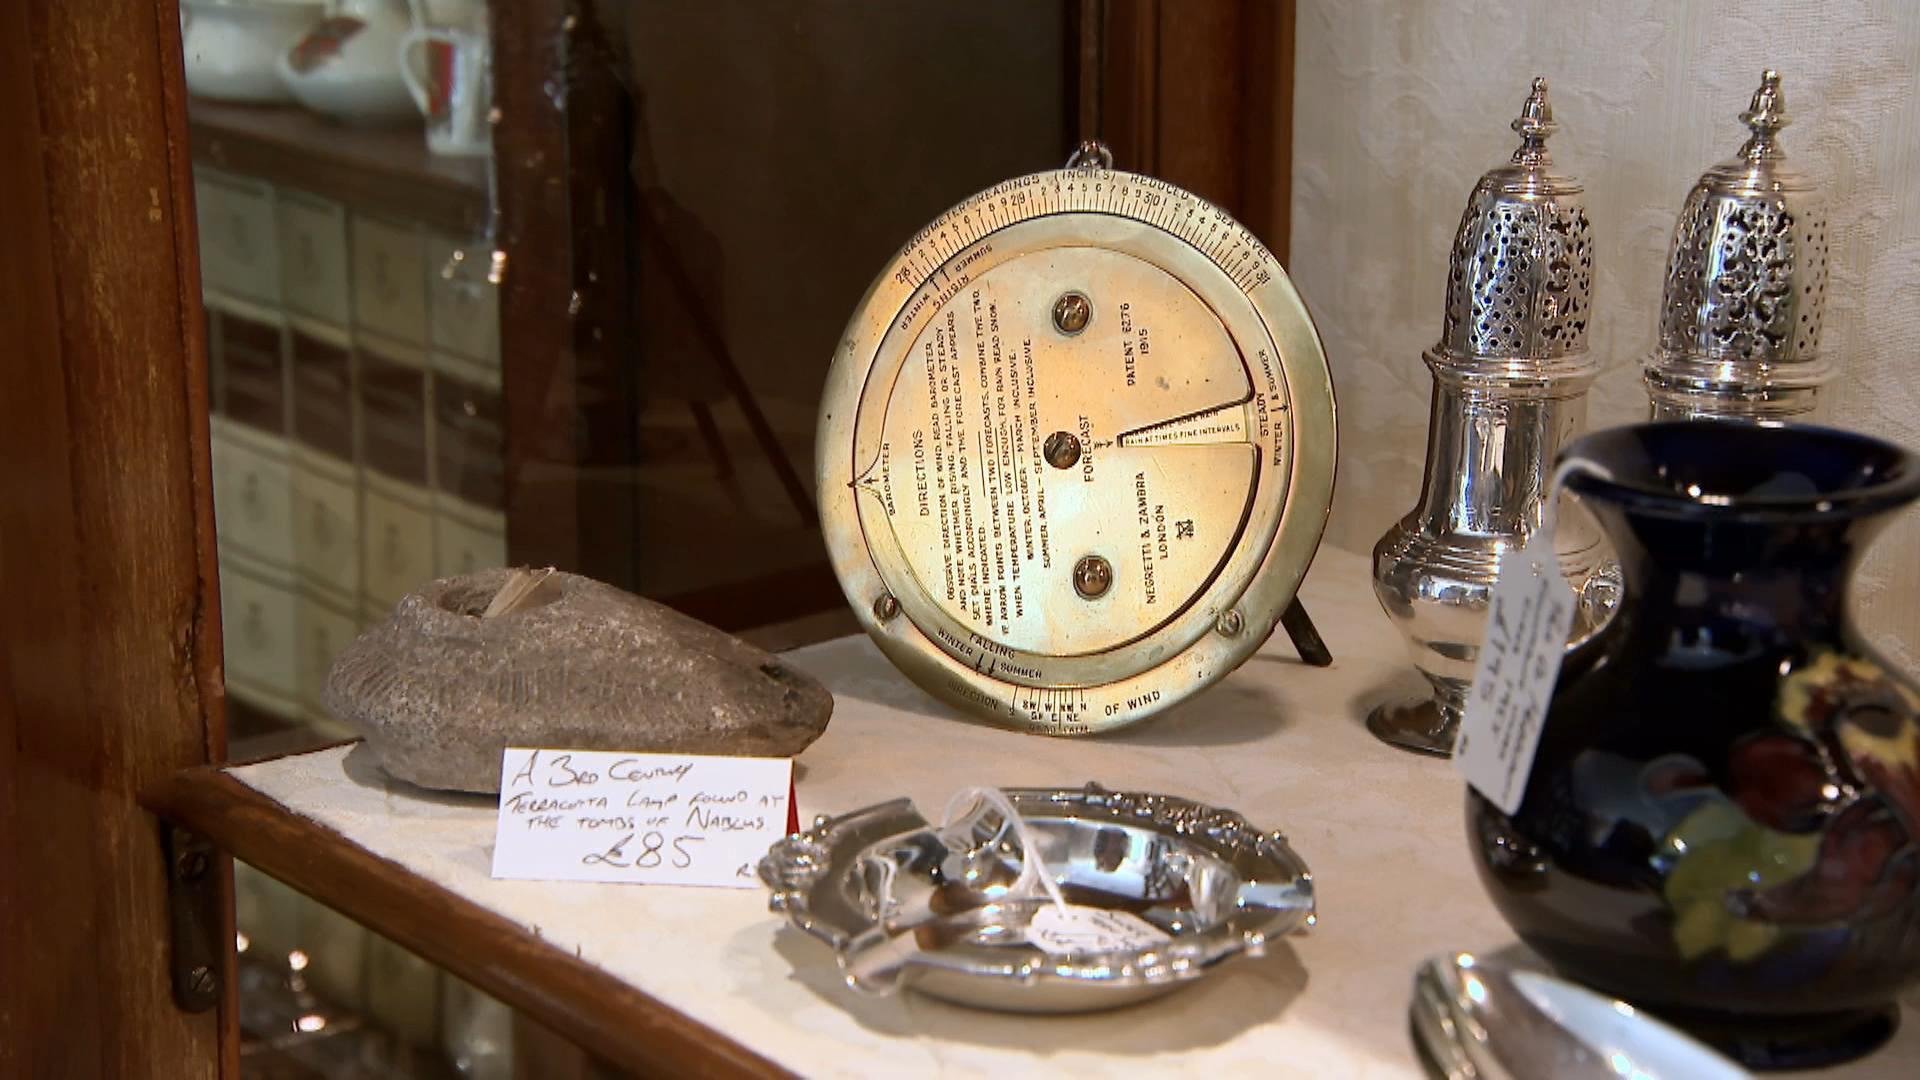 Antiques Road Trip - Trevanion and Timothy Medhurst, Day 5 - Twin Cities PBS